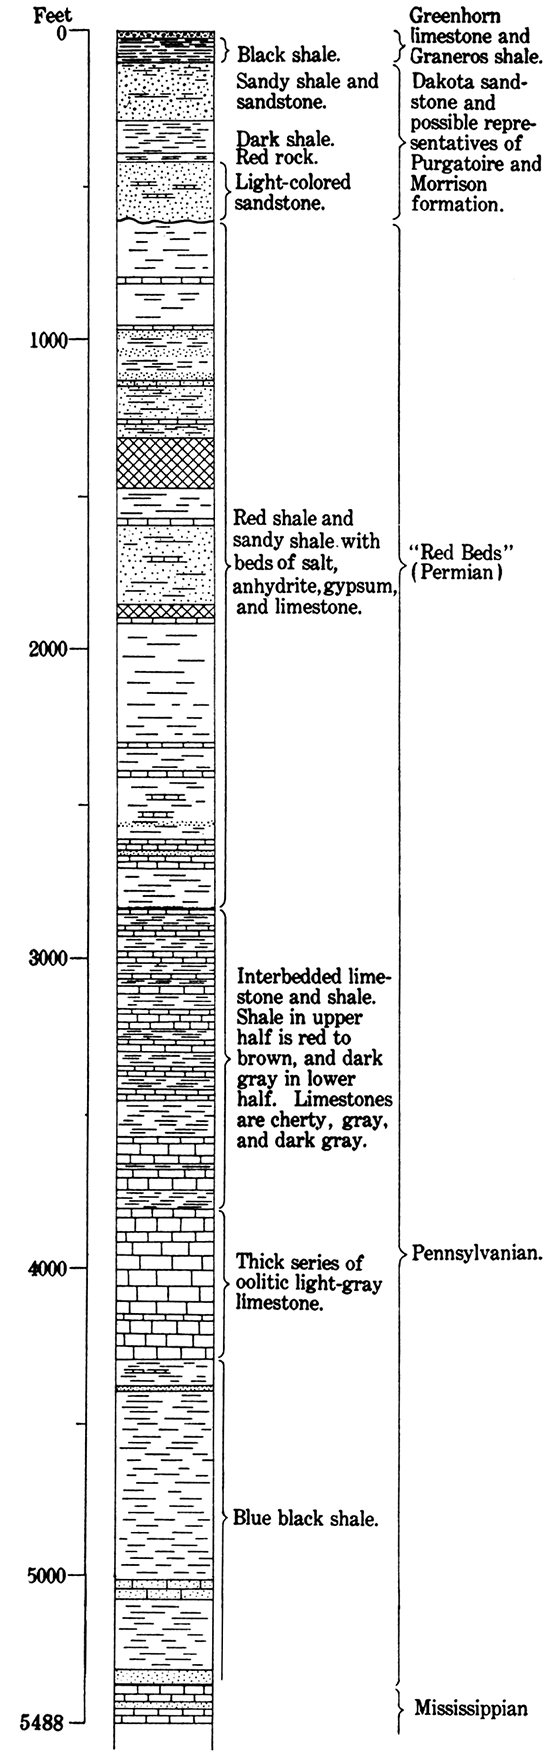 Stratigraphic section of buried rocks of Hamilton County.